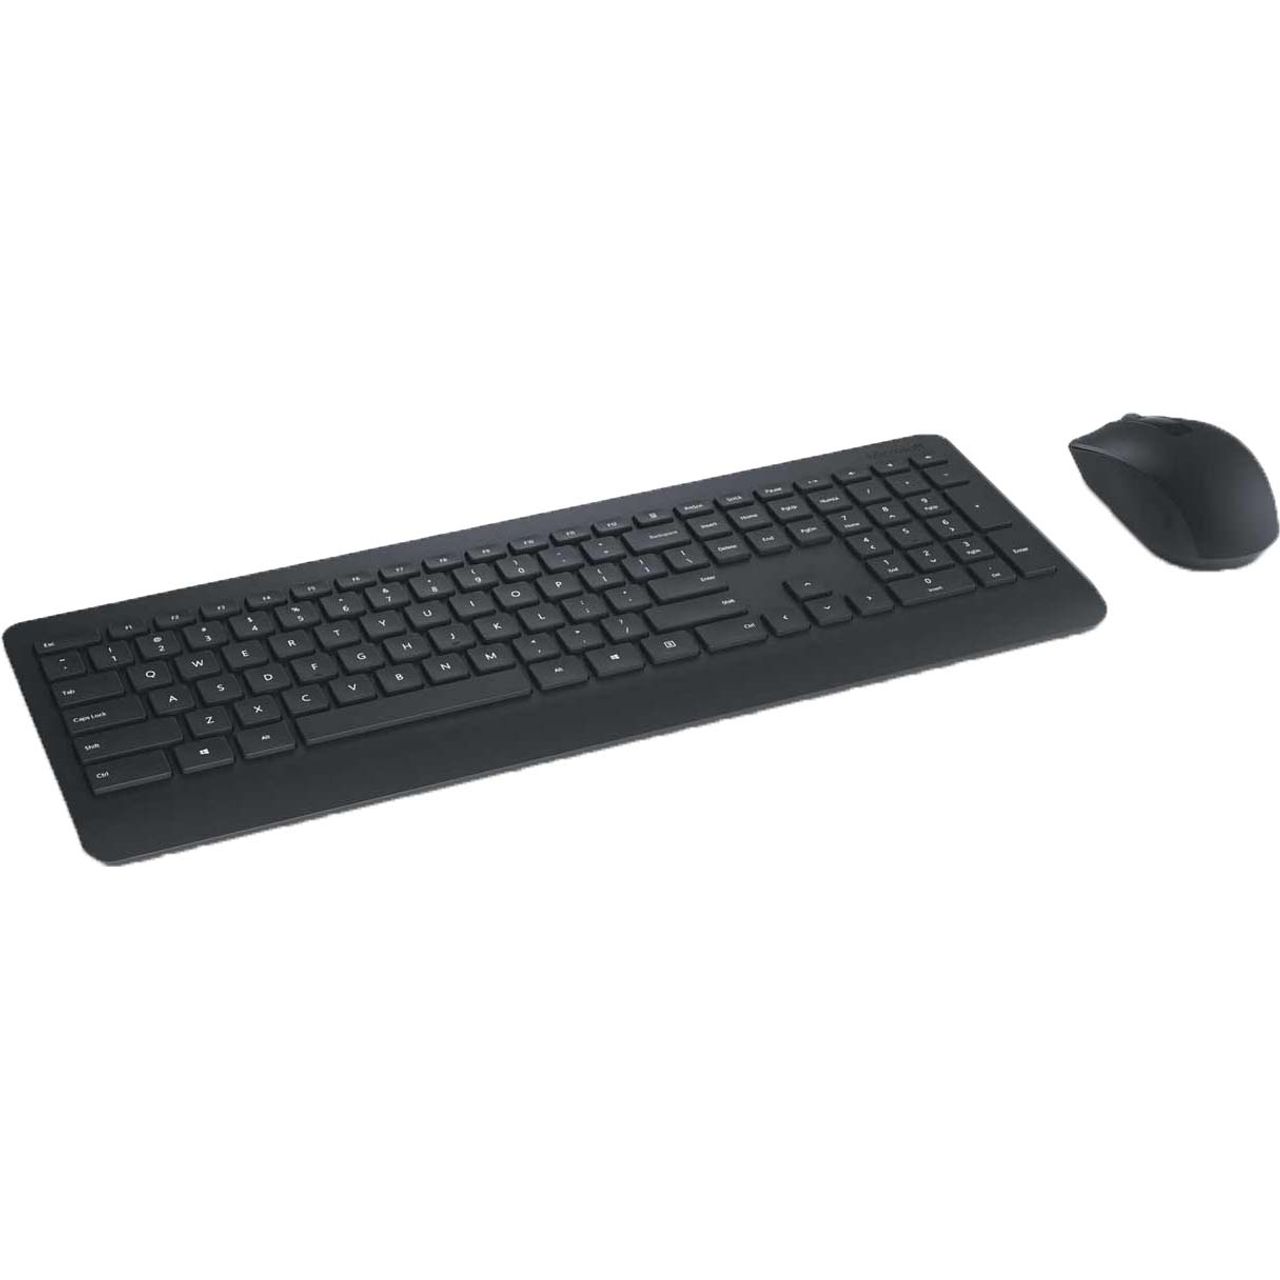 Microsoft Desktop 900 Wireless USB Keyboard with Optical Mouse Review